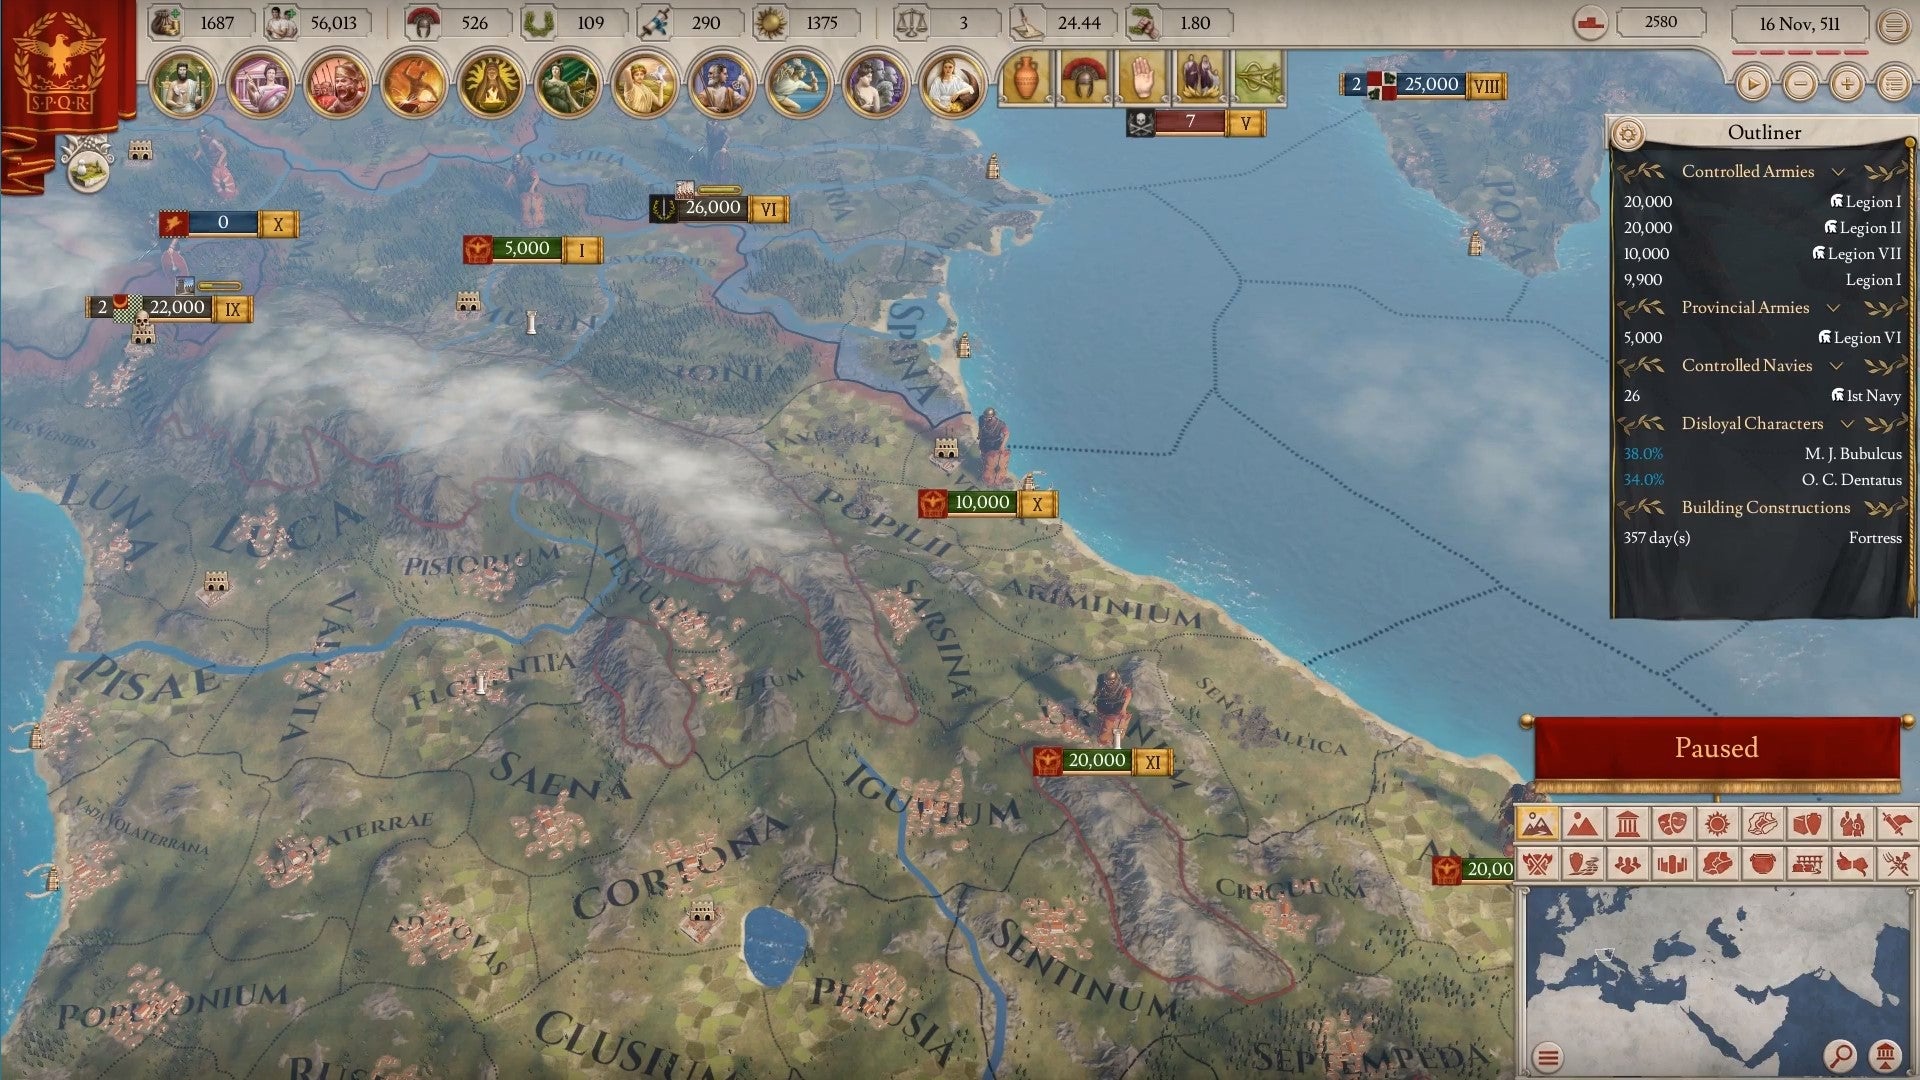 Image for Imperator: Rome plus multiple game expansions lift Paradox's Q2